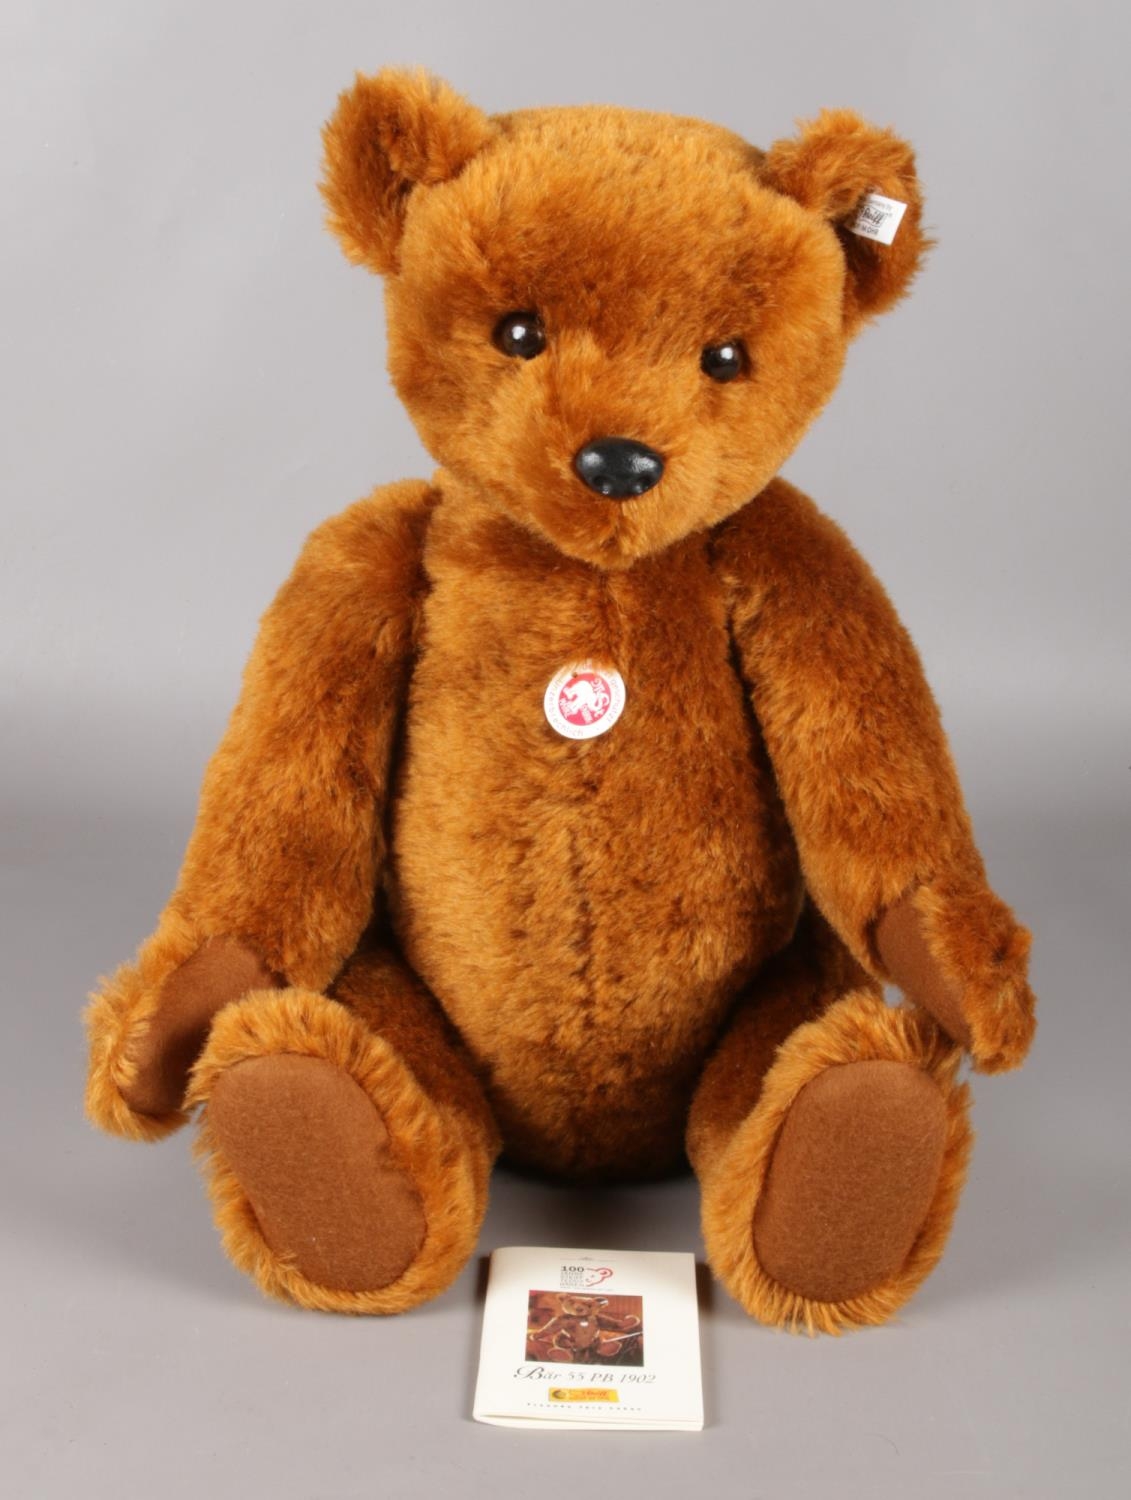 A boxed Steiff 55PB Limited Edition teddy bear, 1902 Replica, 55cm, Number 02390/7000 worldwide. - Image 4 of 4